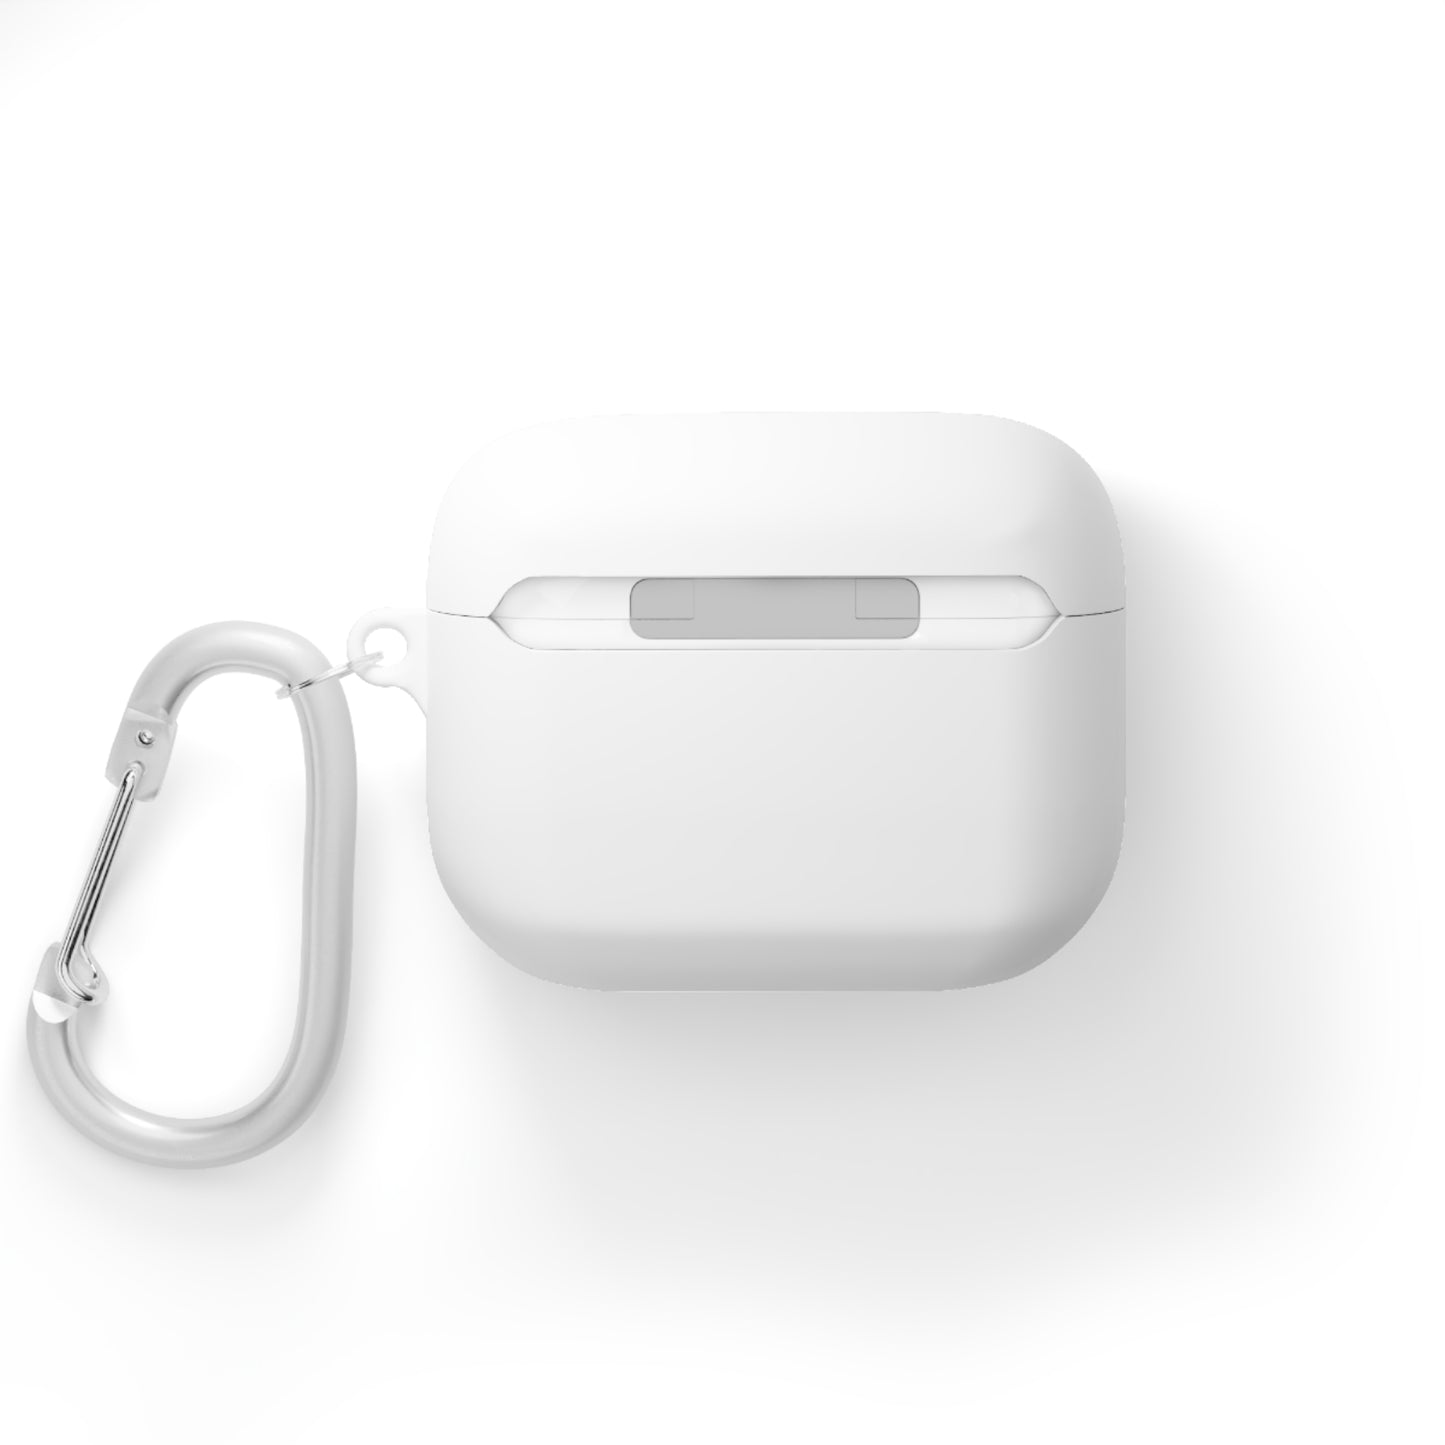 Rip Van Sleeping AirPods / Airpods Pro Case cover